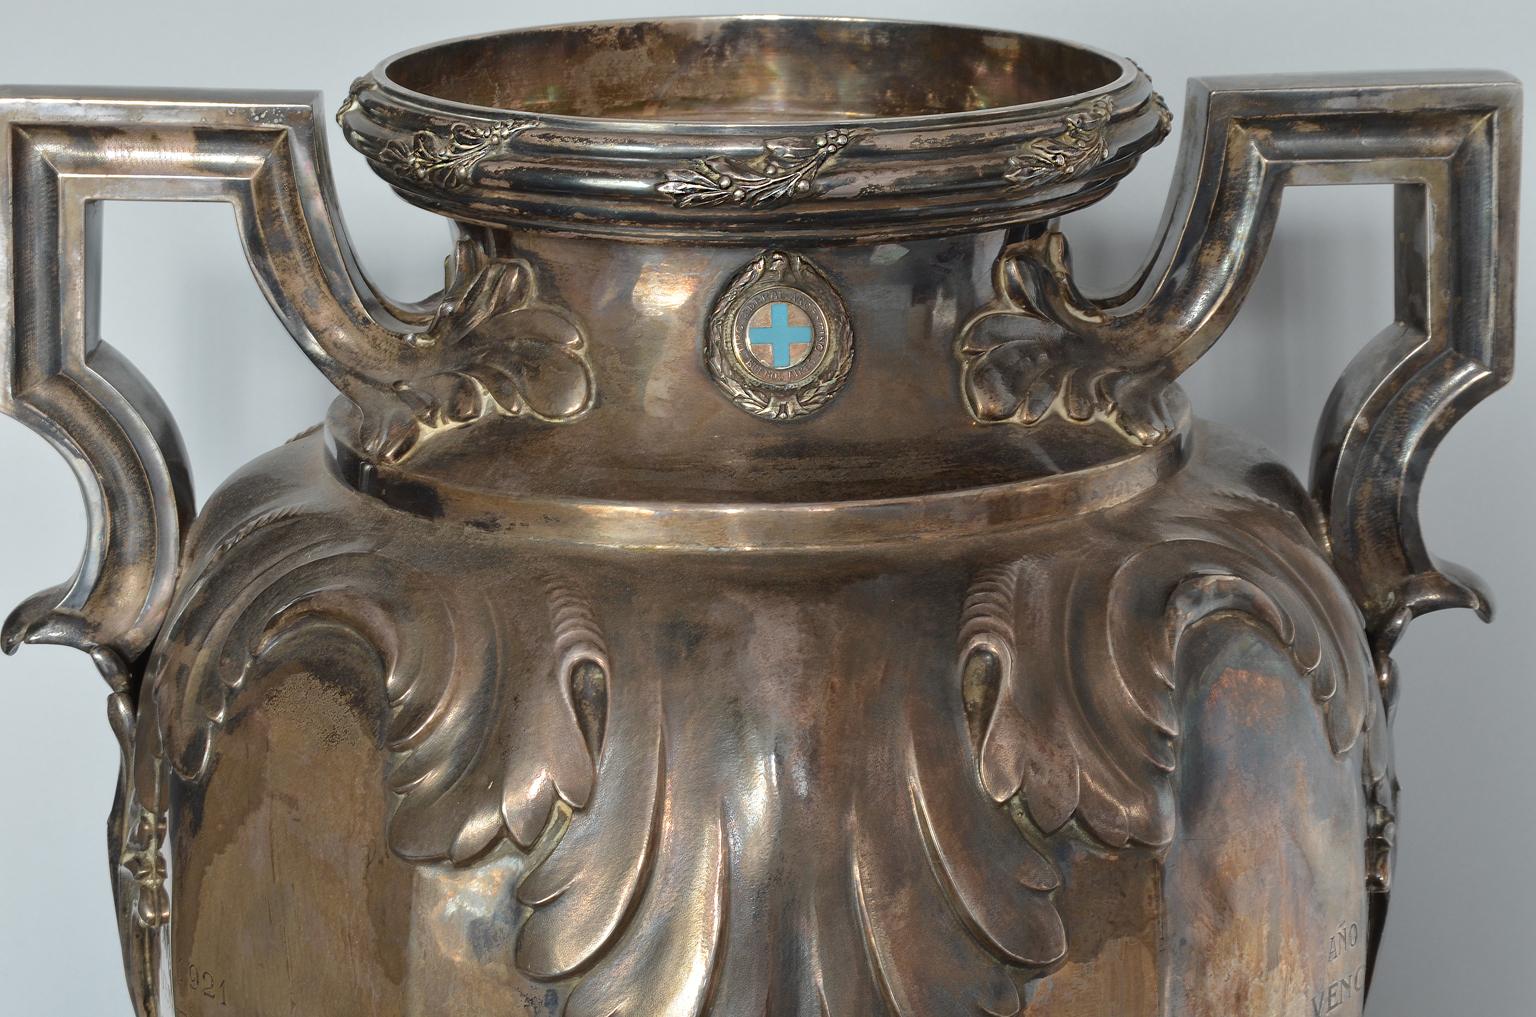 Massive silver vase trophy/cup “Tiro Federal Argentino“, 1916-1939.
With a Frensh Hallmark at the edge of the top for Silver Fineness .950. 
(Mercury Head and number 1 for Silver Fineness .950 - Frensh Export Silver Hall Mark for big articles